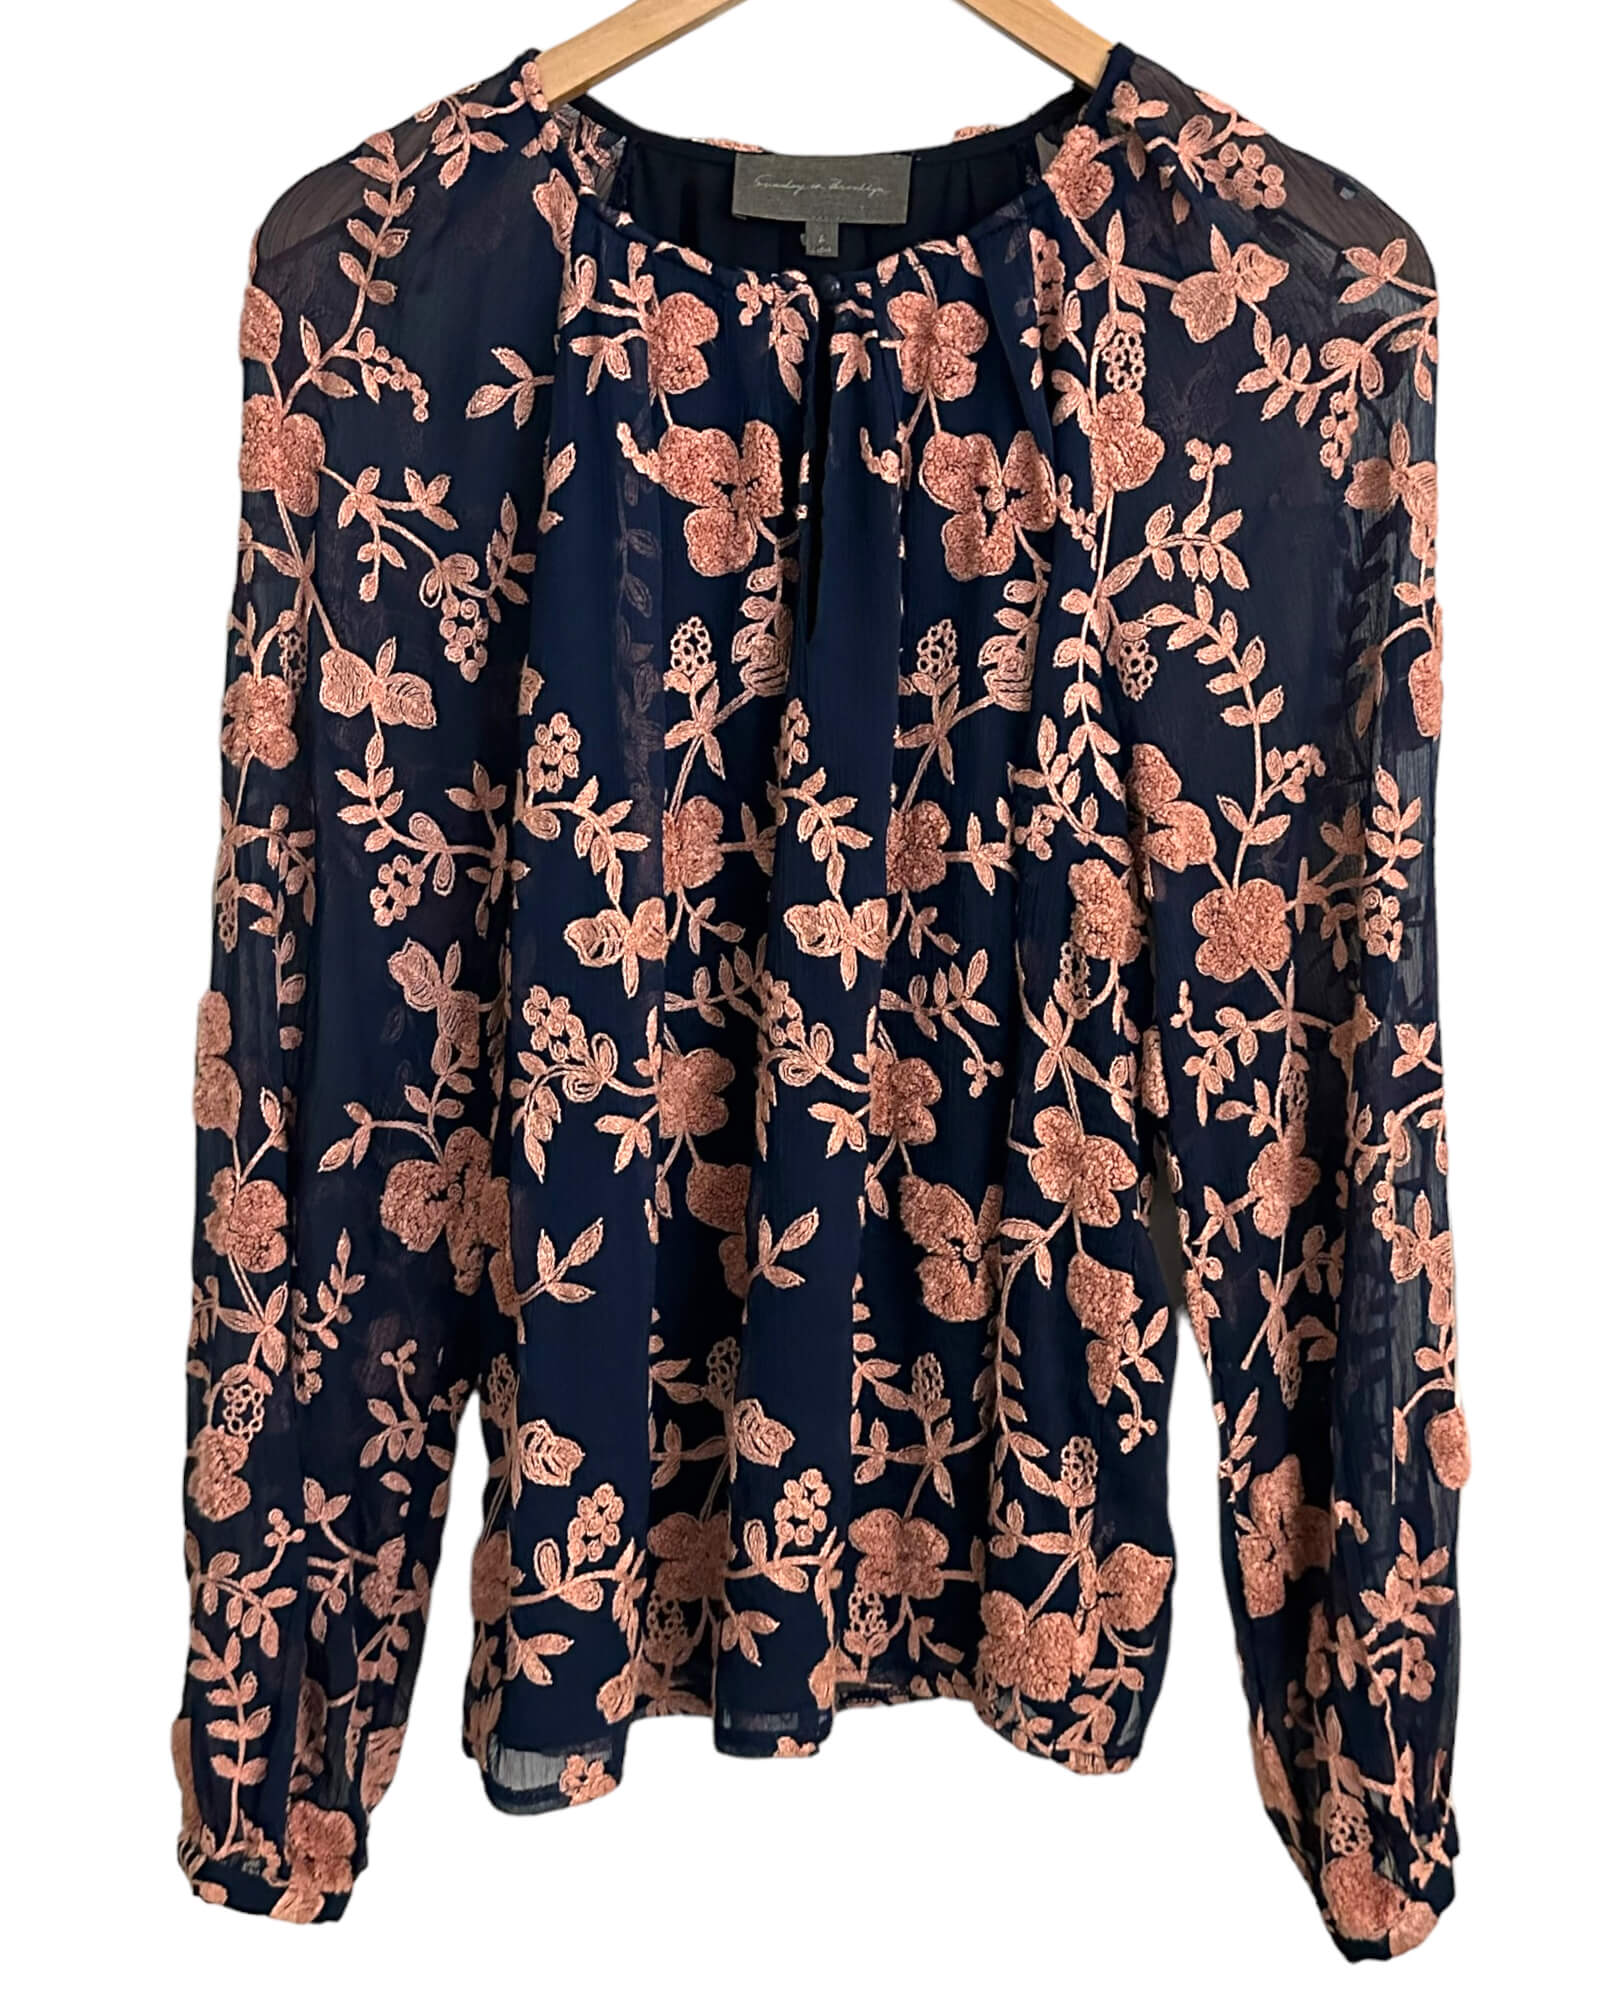 Warm Autumn SUNDAY IN BROOKLYN ANTHROPOLOGIE floral embroidery blouse 